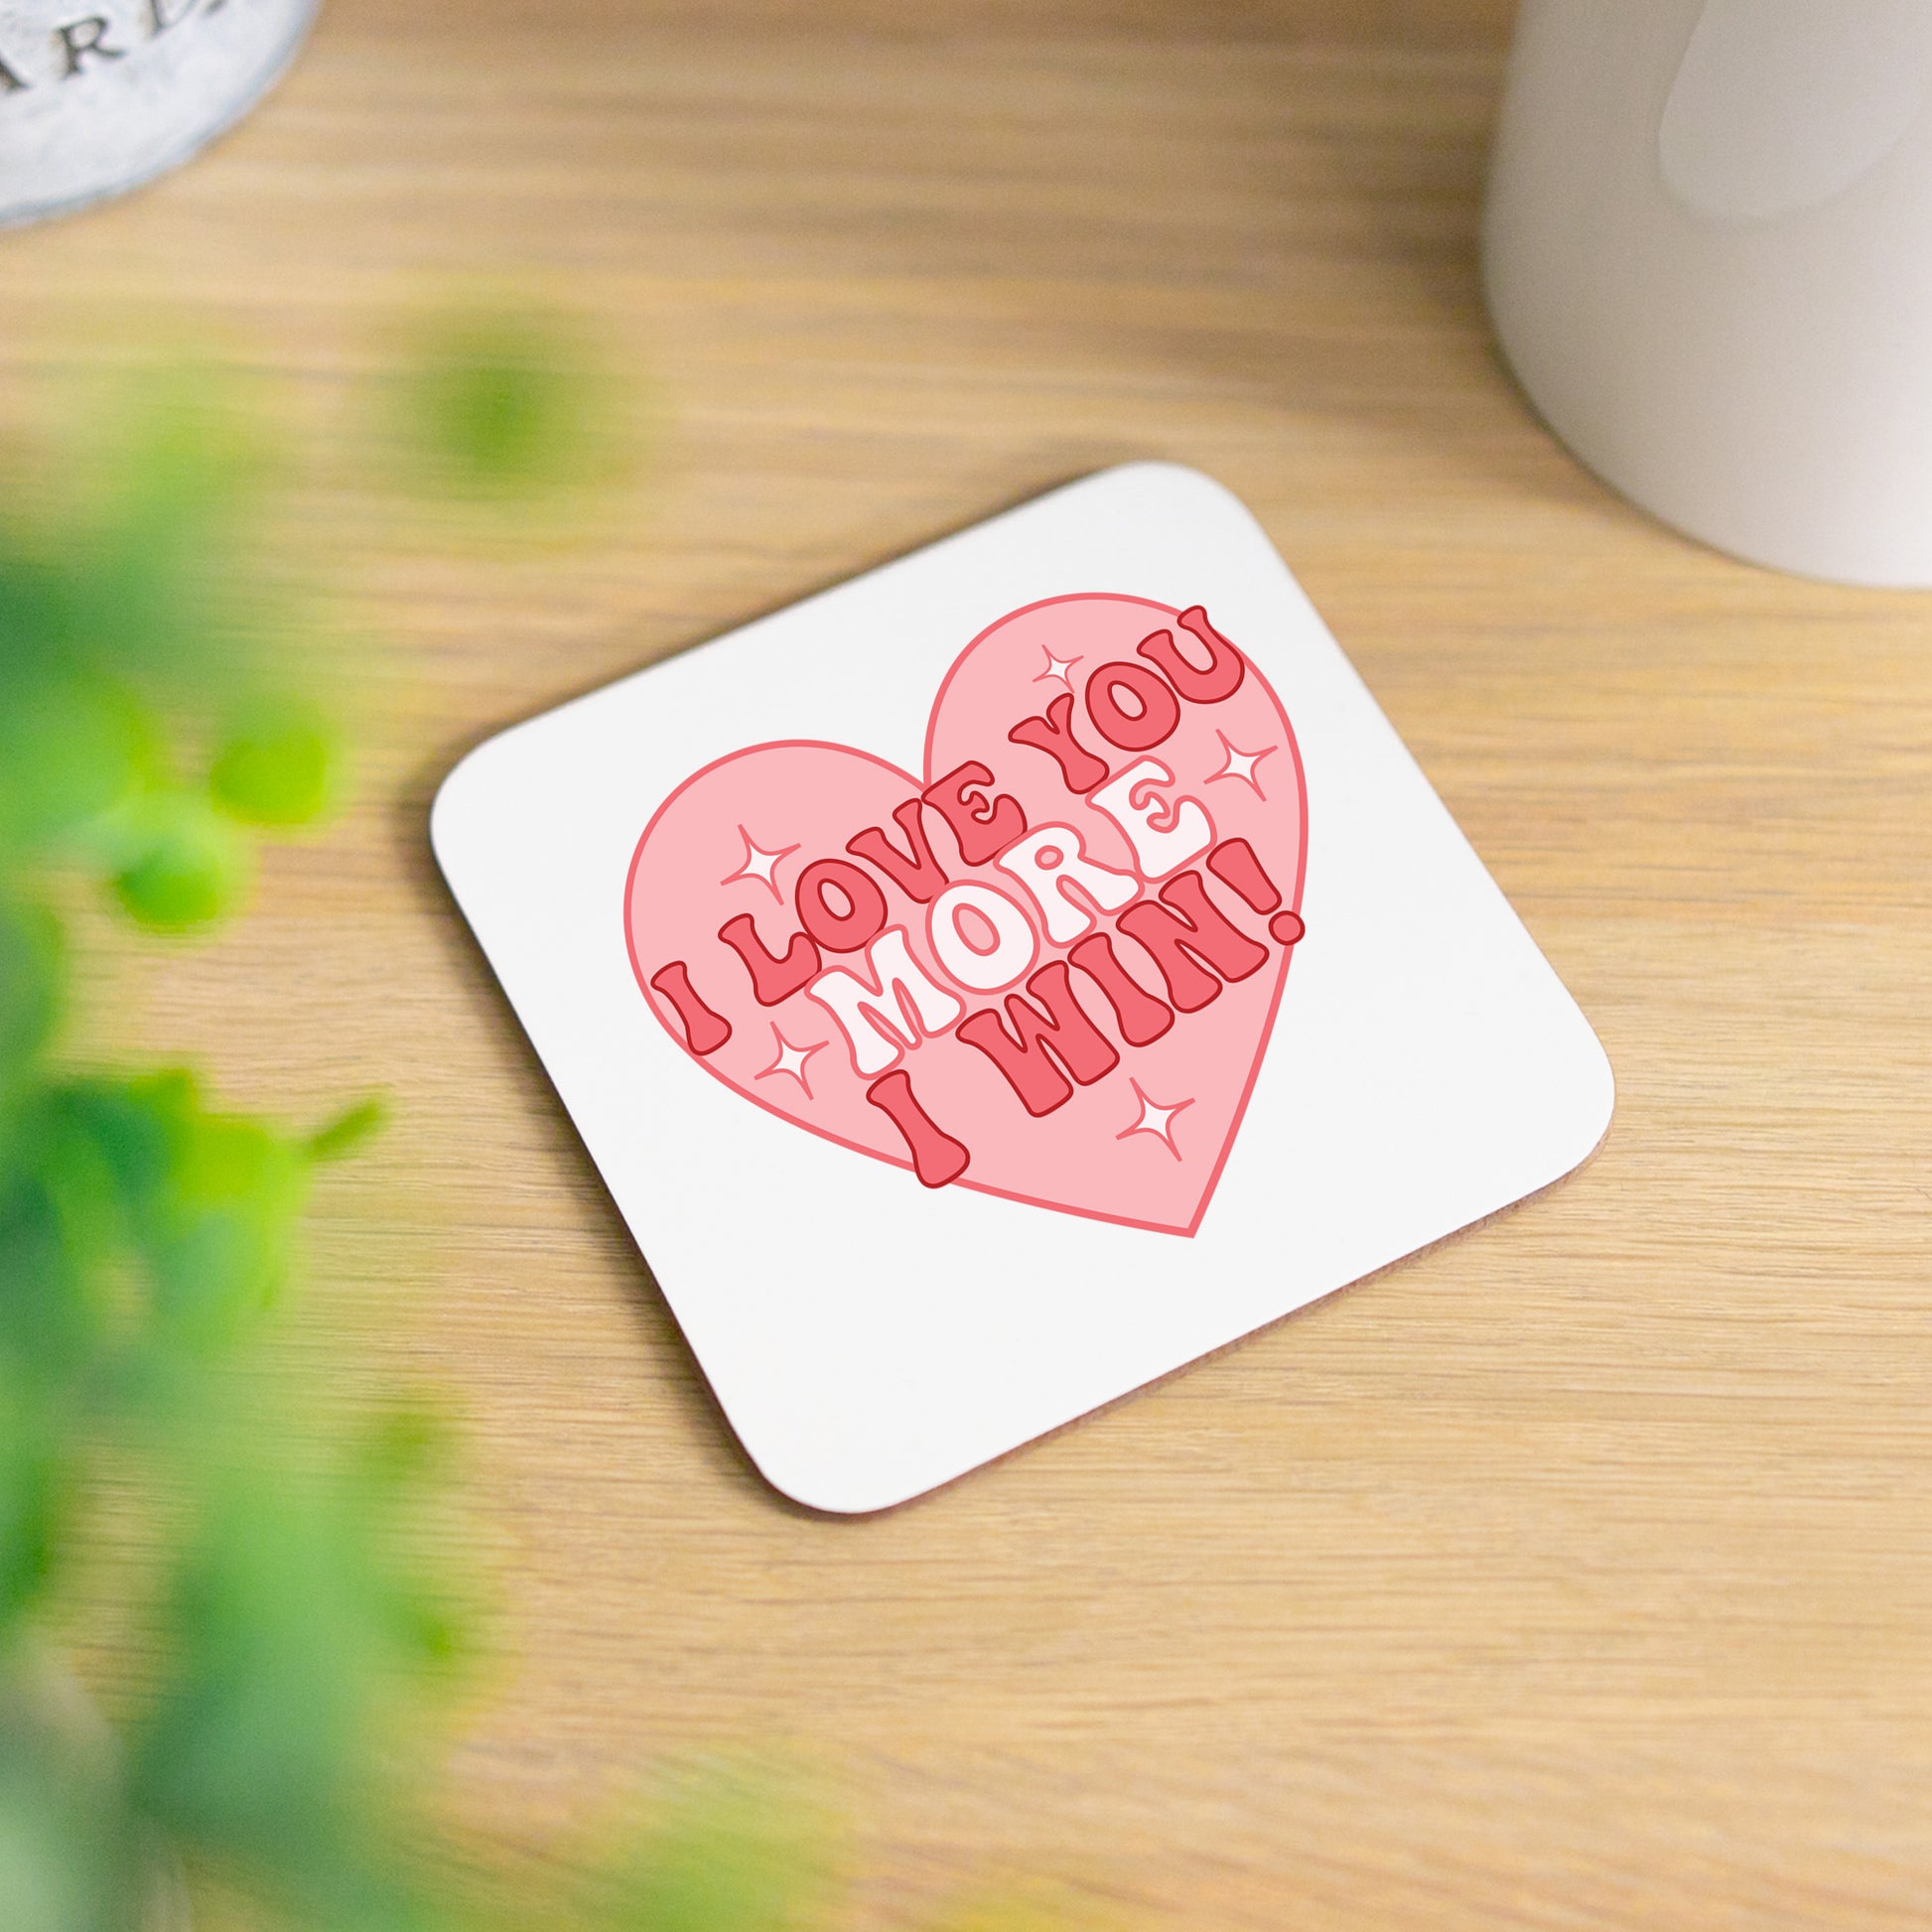 I Love You More I Win Mug and/or Coaster Gift  - Always Looking Good - Printed Coaster On Its Own  